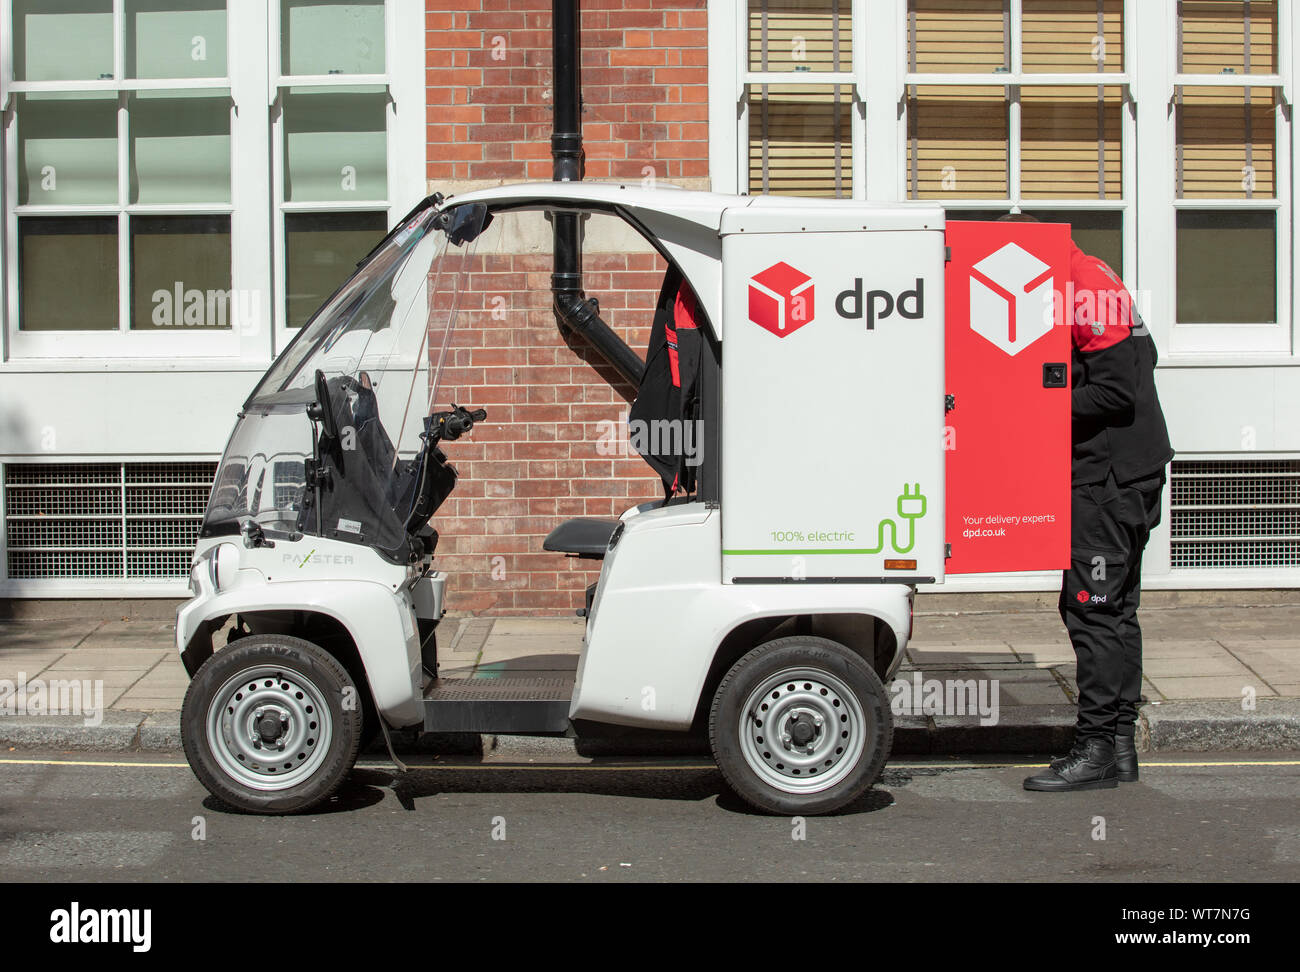 https://c8.alamy.com/comp/WT7N7G/small-electric-futuristic-transport-van-used-by-the-delivery-company-dpd-seen-on-london-streets-to-improve-air-quality-and-efficient-delivery-service-WT7N7G.jpg